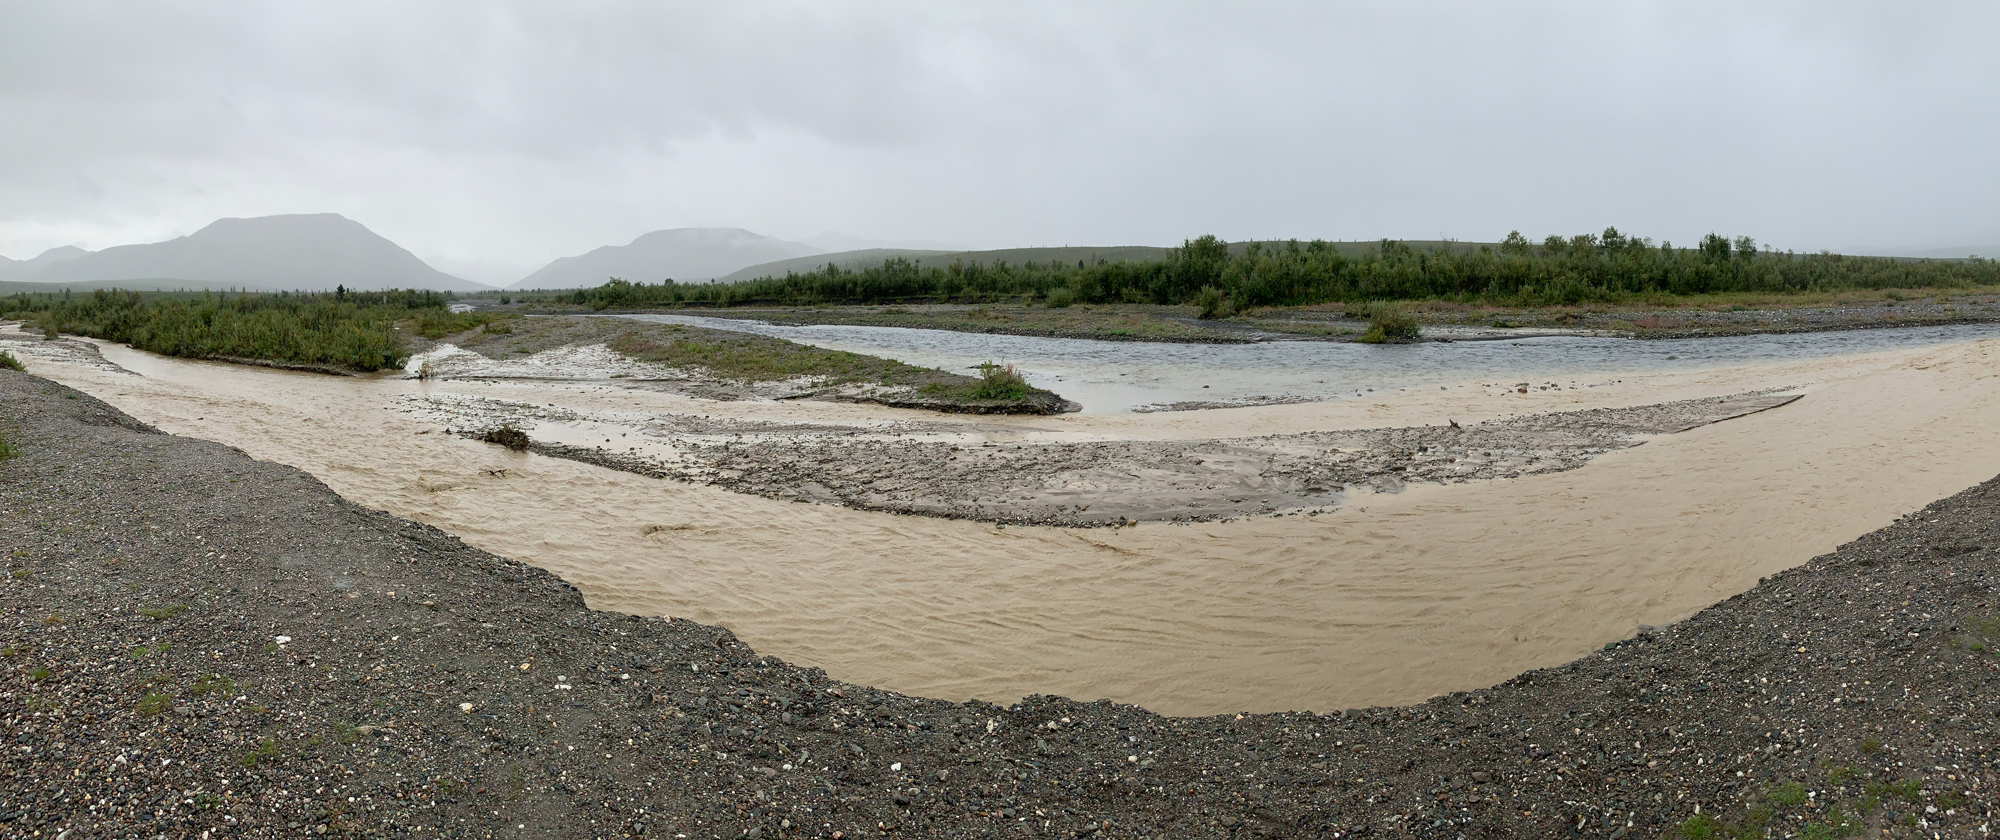 Photograph showing the confluence of two streams in Alaska.